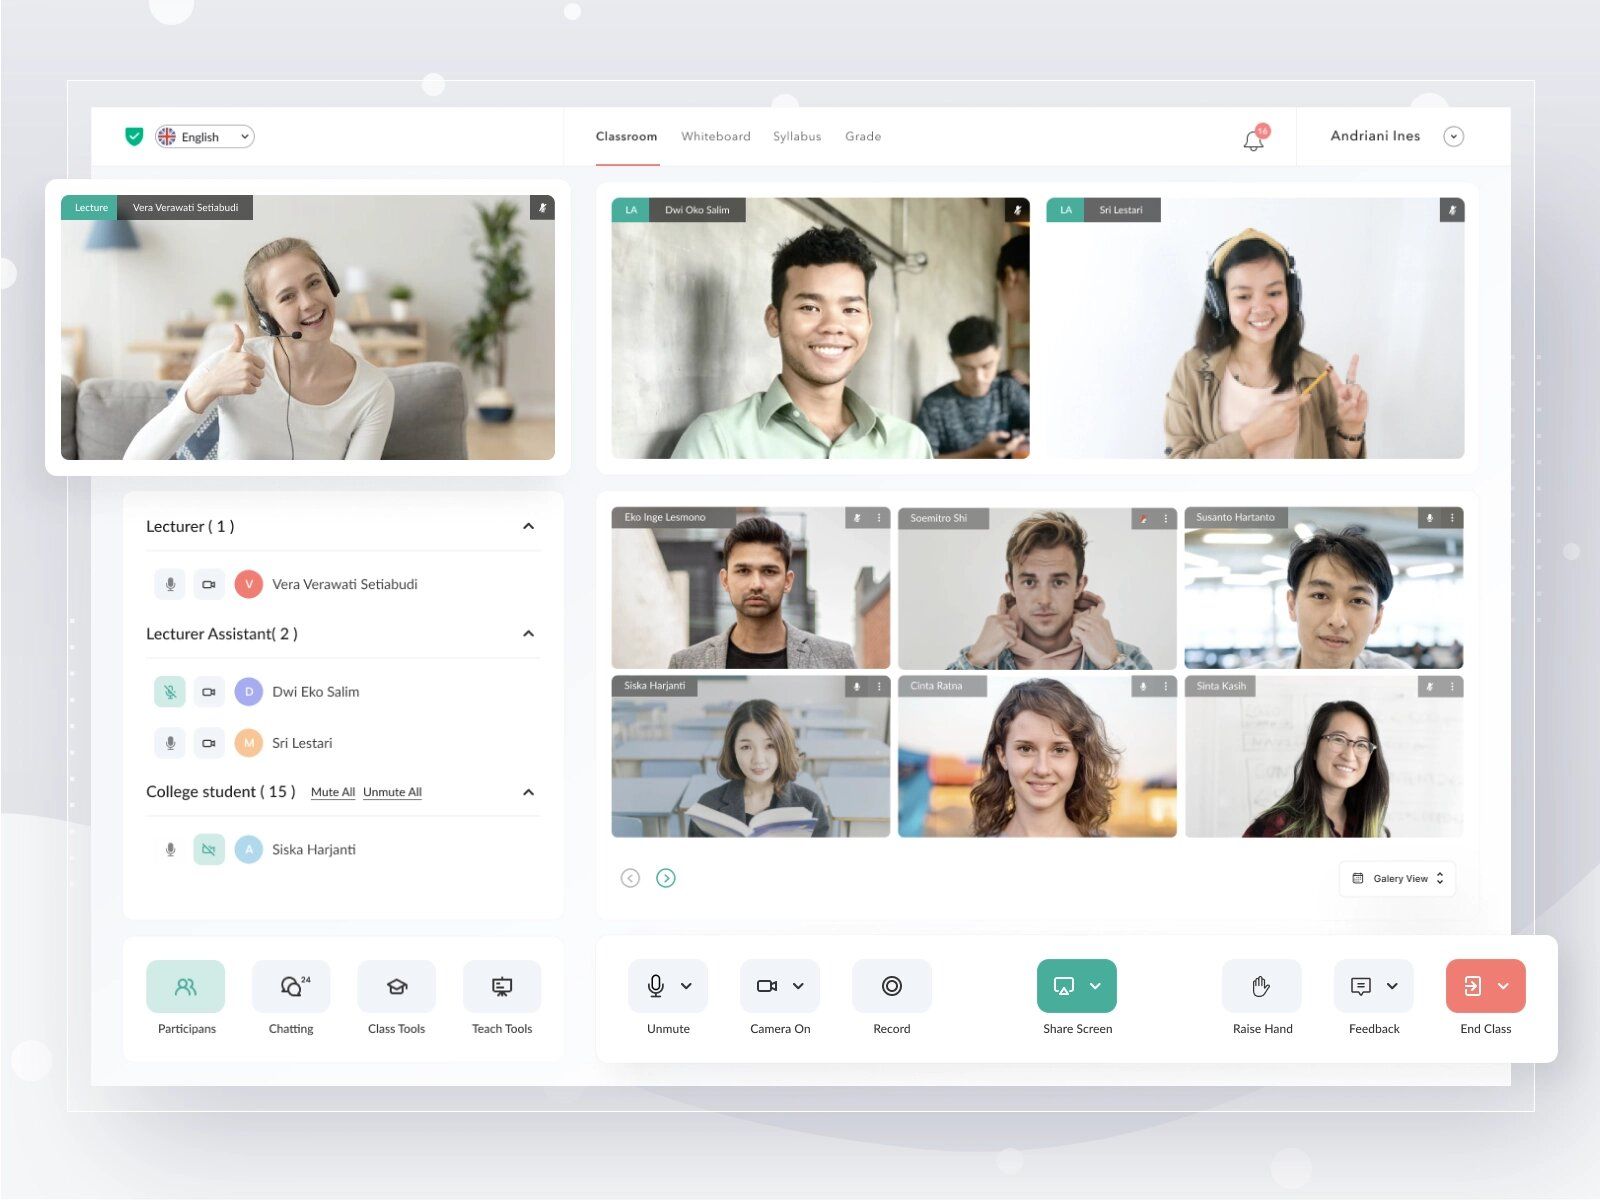 Digital conference platform to create an online presence without leaving your website (*image by [Sulton handaya](https://dribbble.com/sultonhand){ rel="nofollow" target="_blank" .default-md}*)